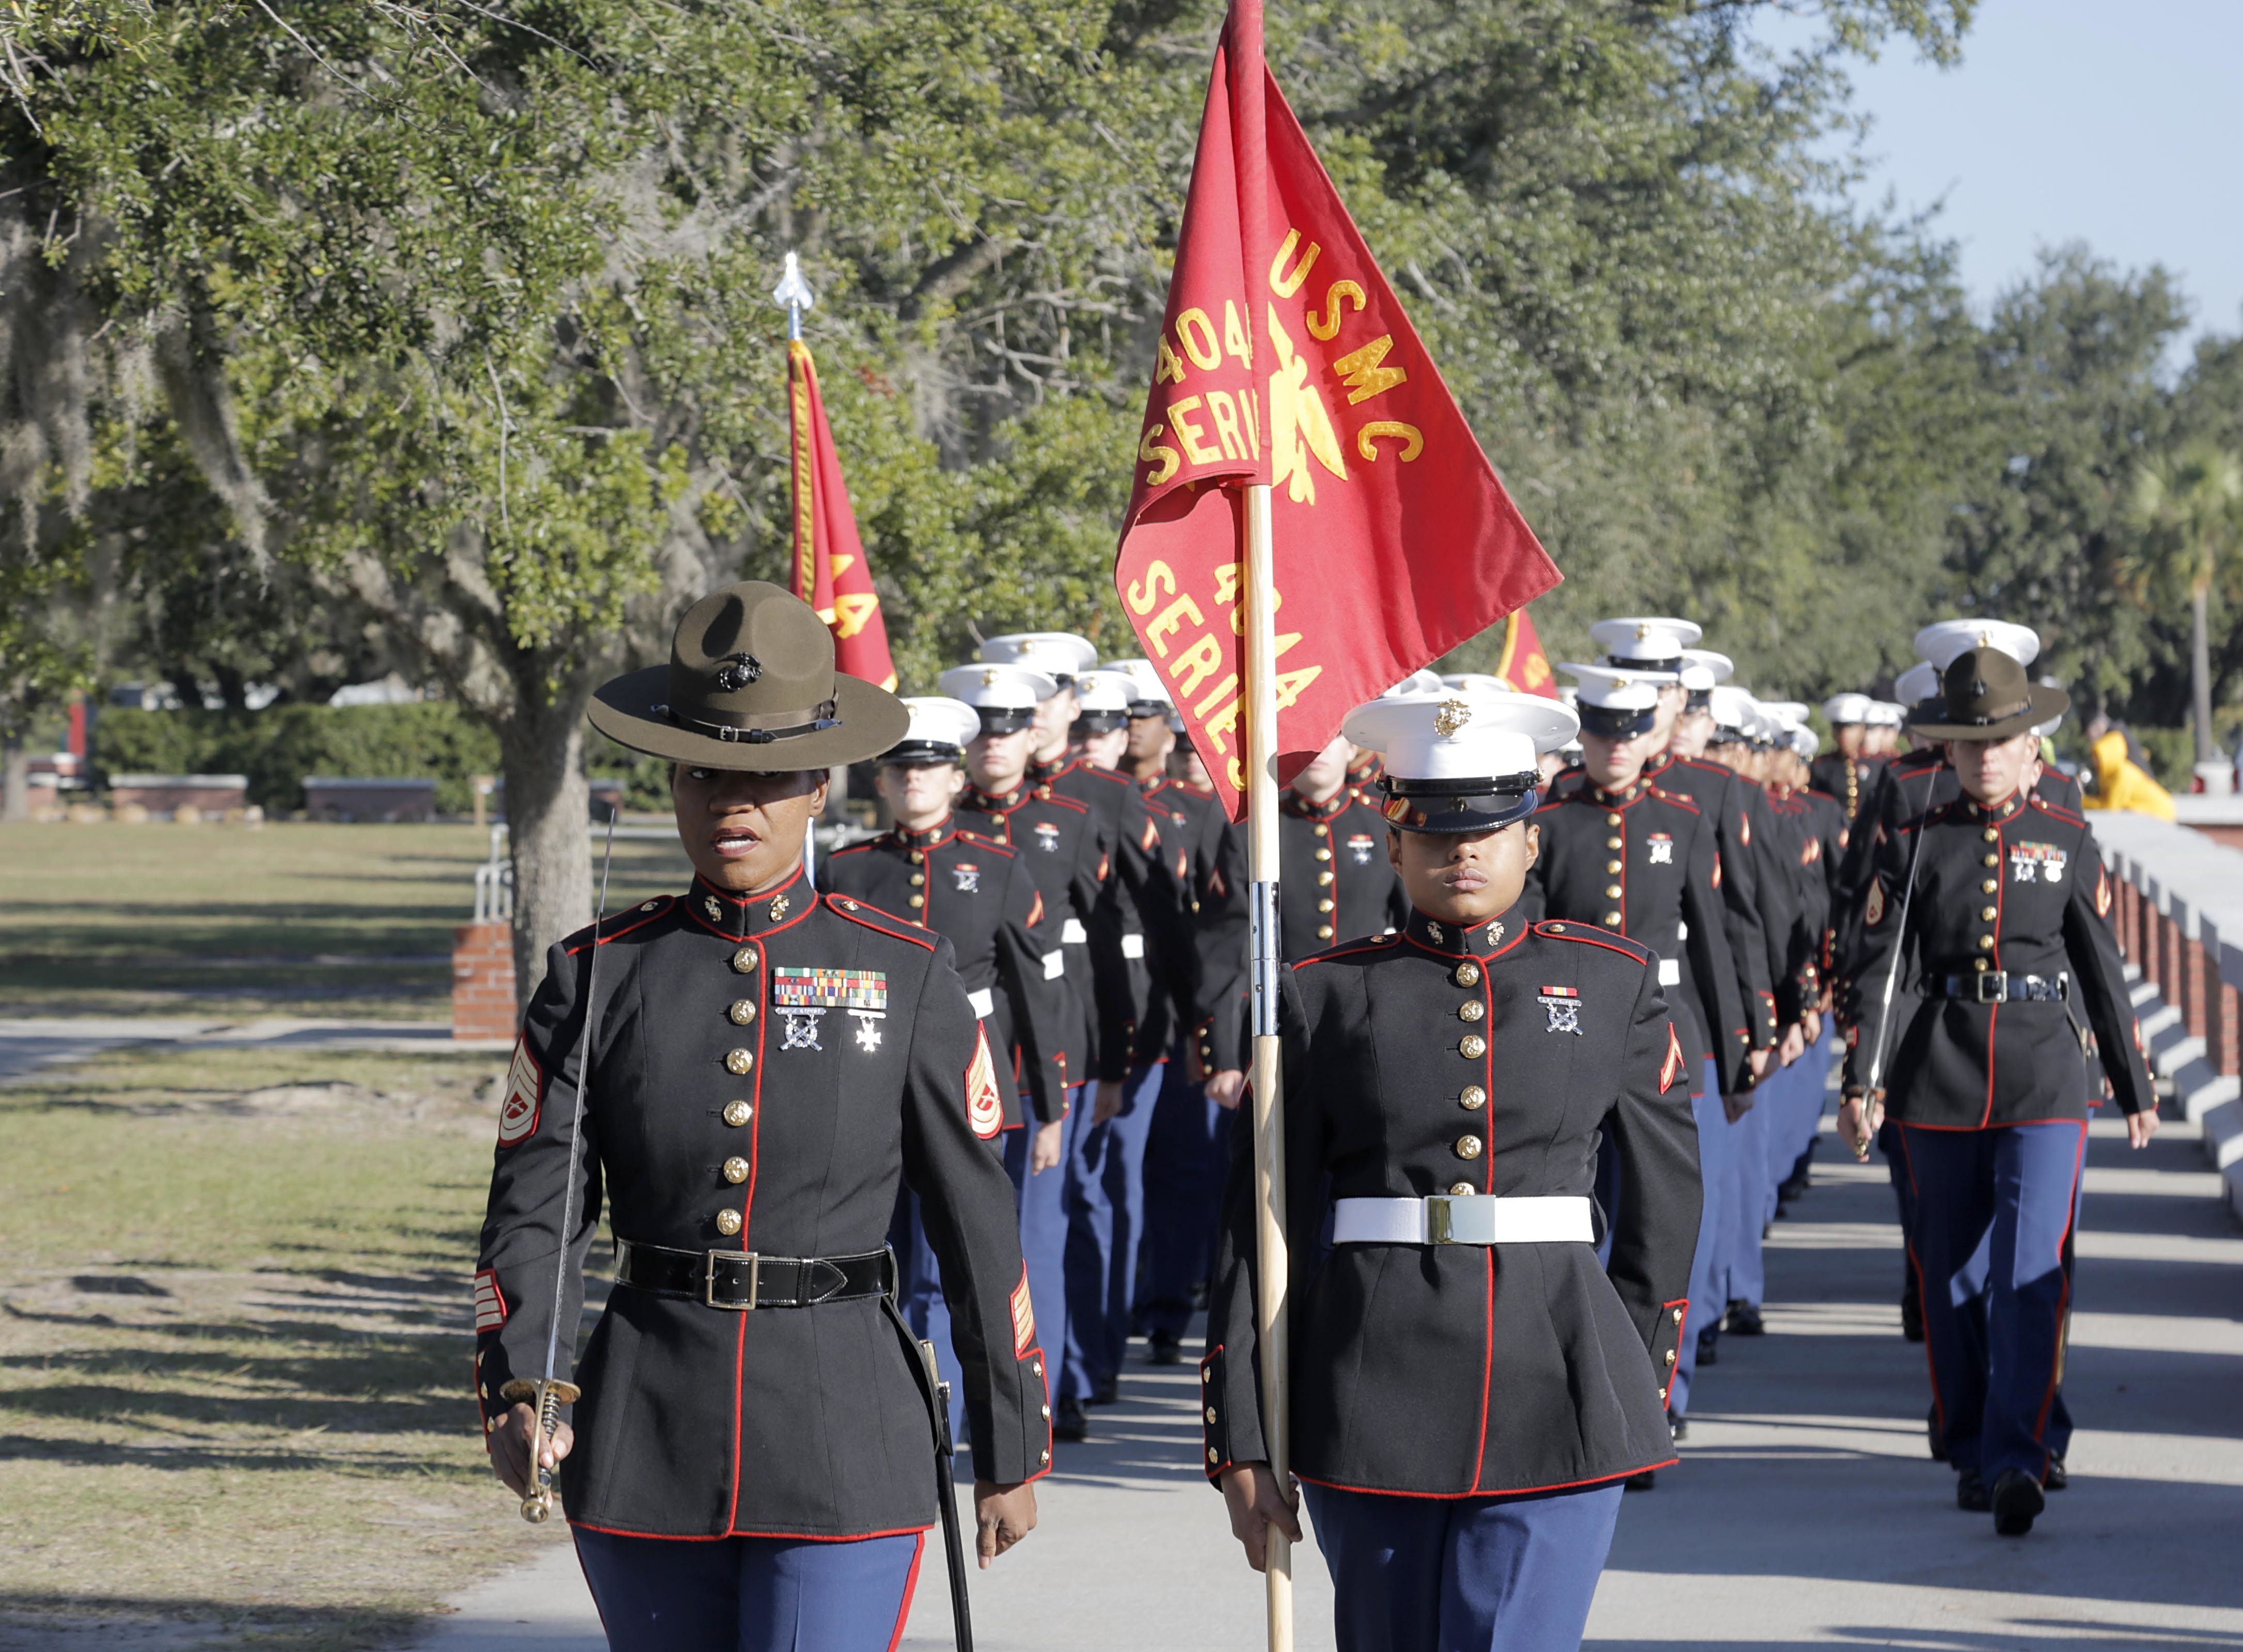 Historic uniform change for female Marines; ‘there will be no doubts